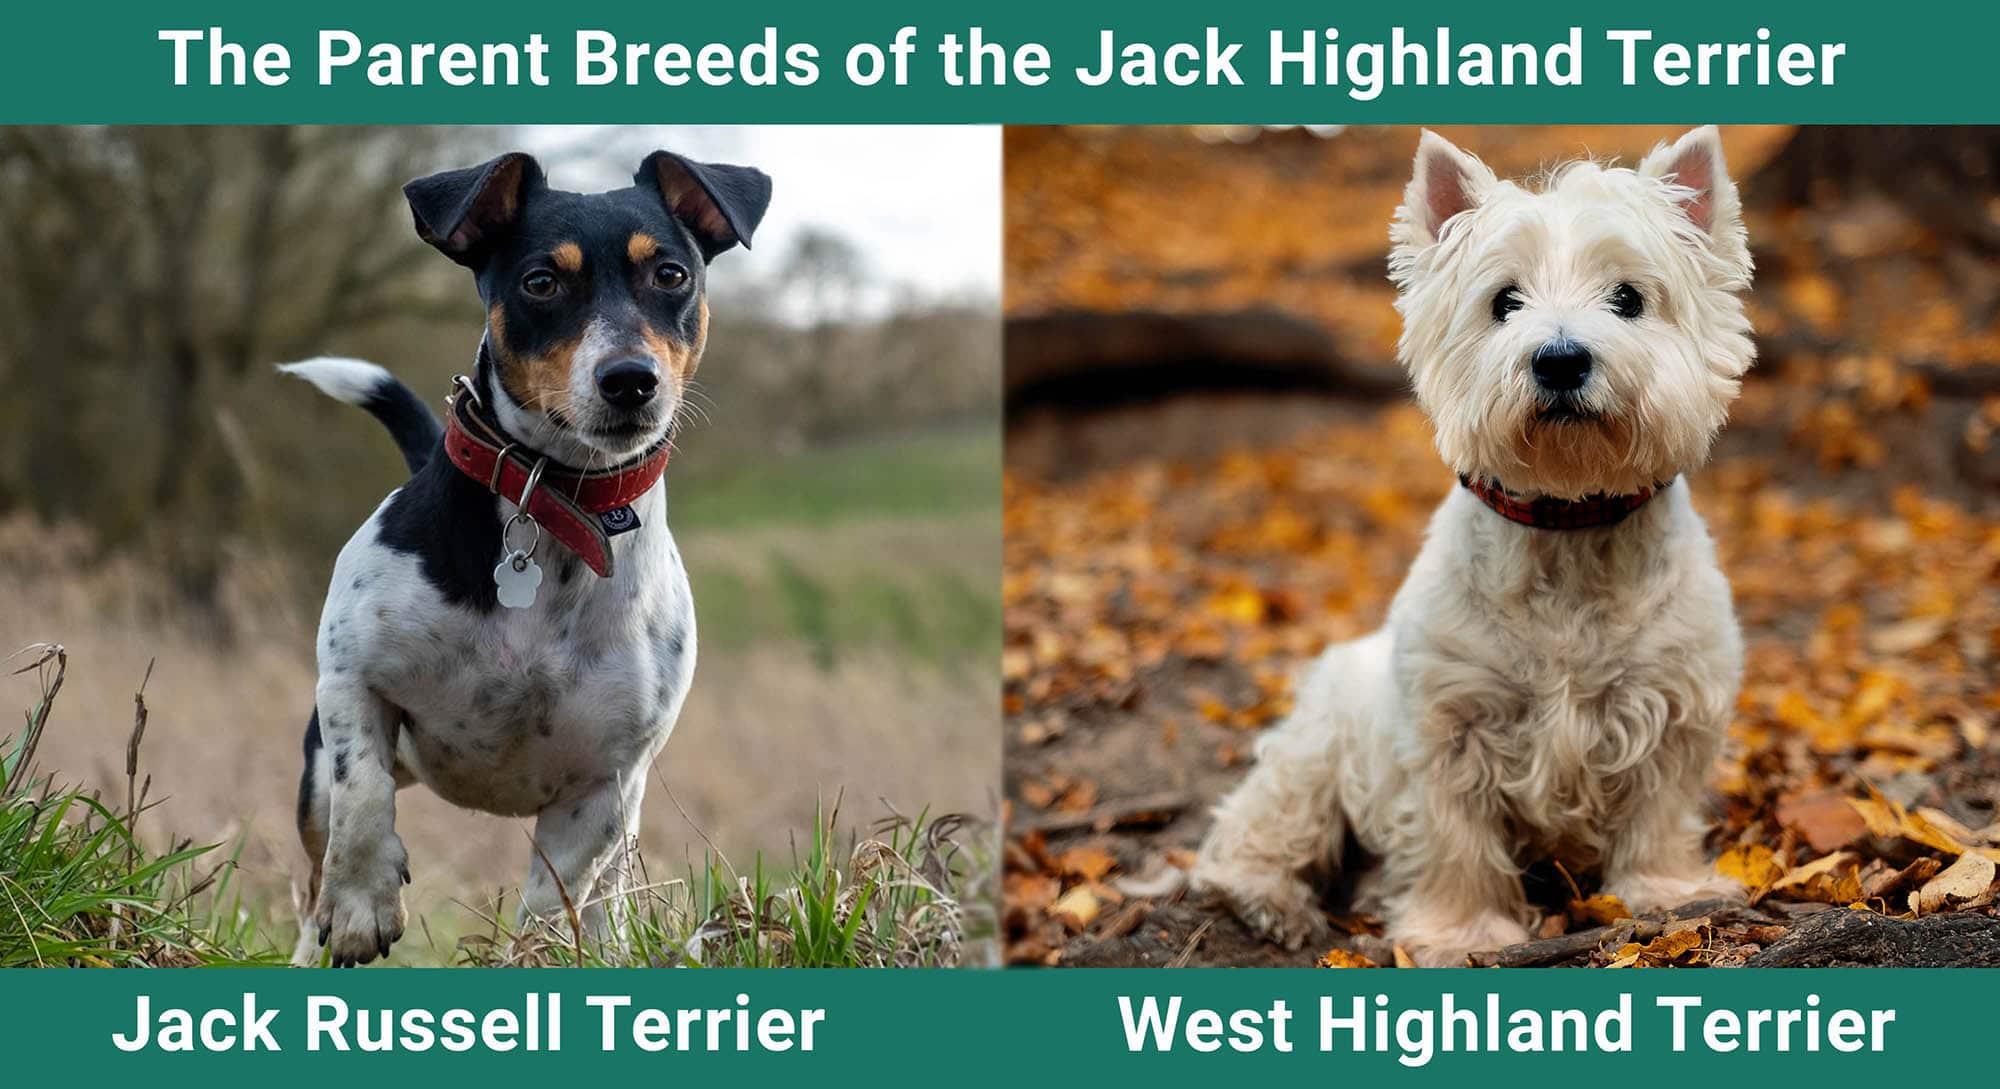 The Parent Breeds of the Jack Highland Terrier